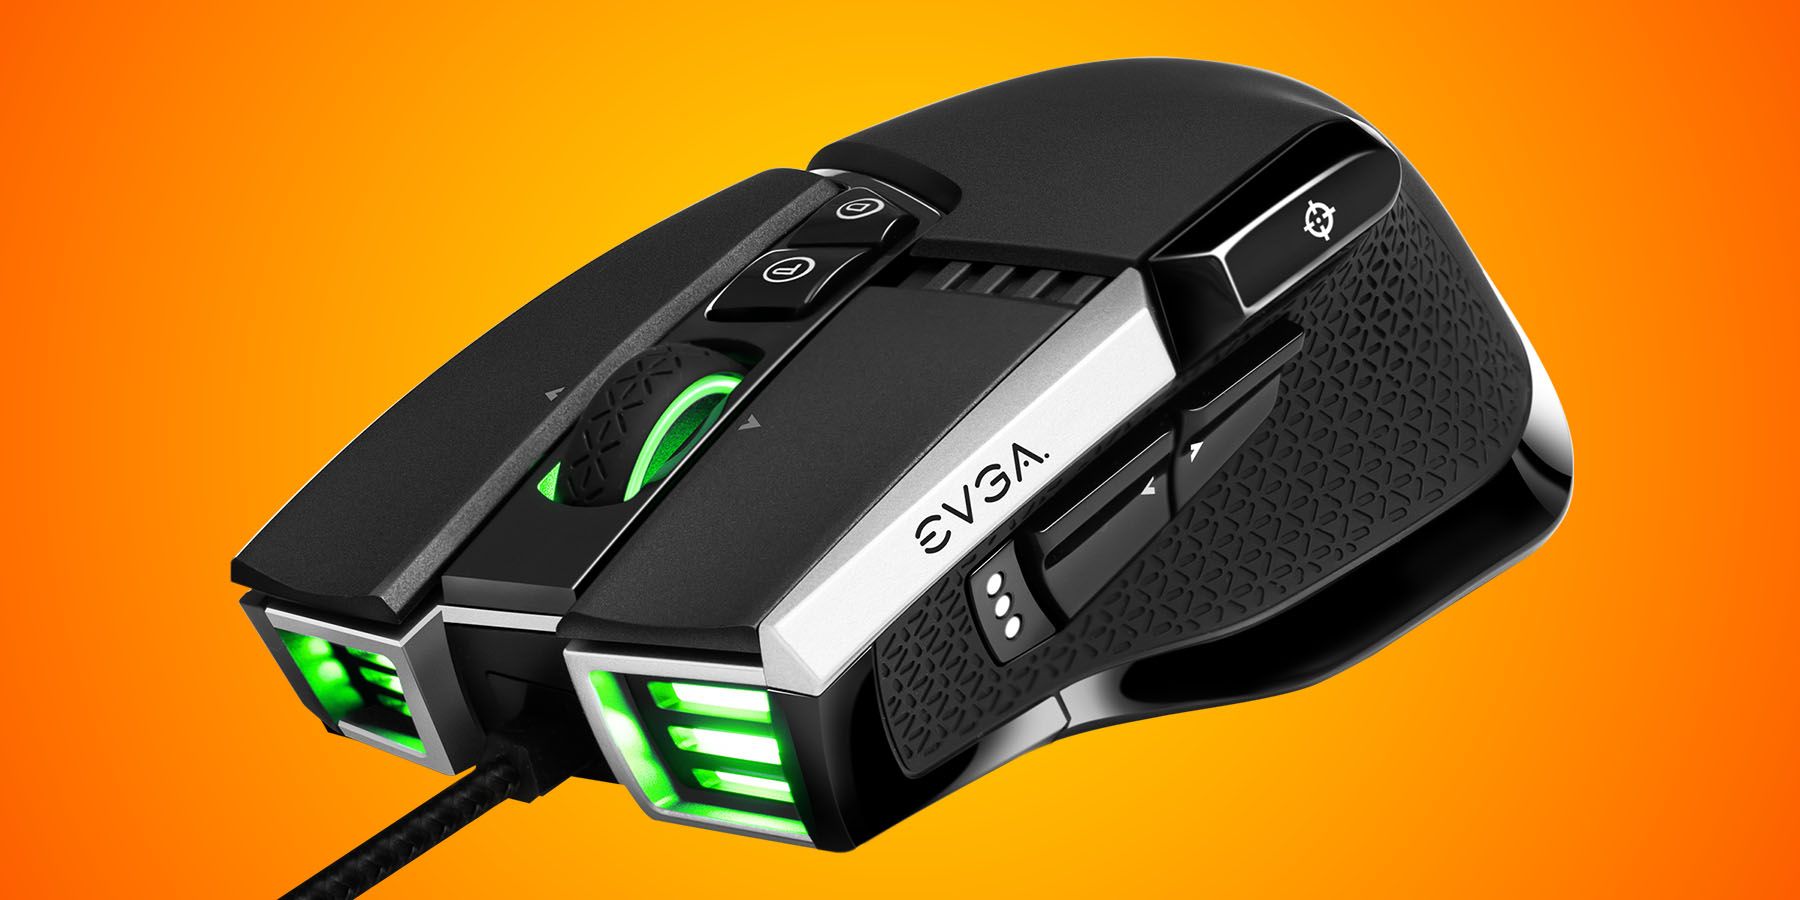 Get EVGA X17 Gaming Mouse Now for 50% Off